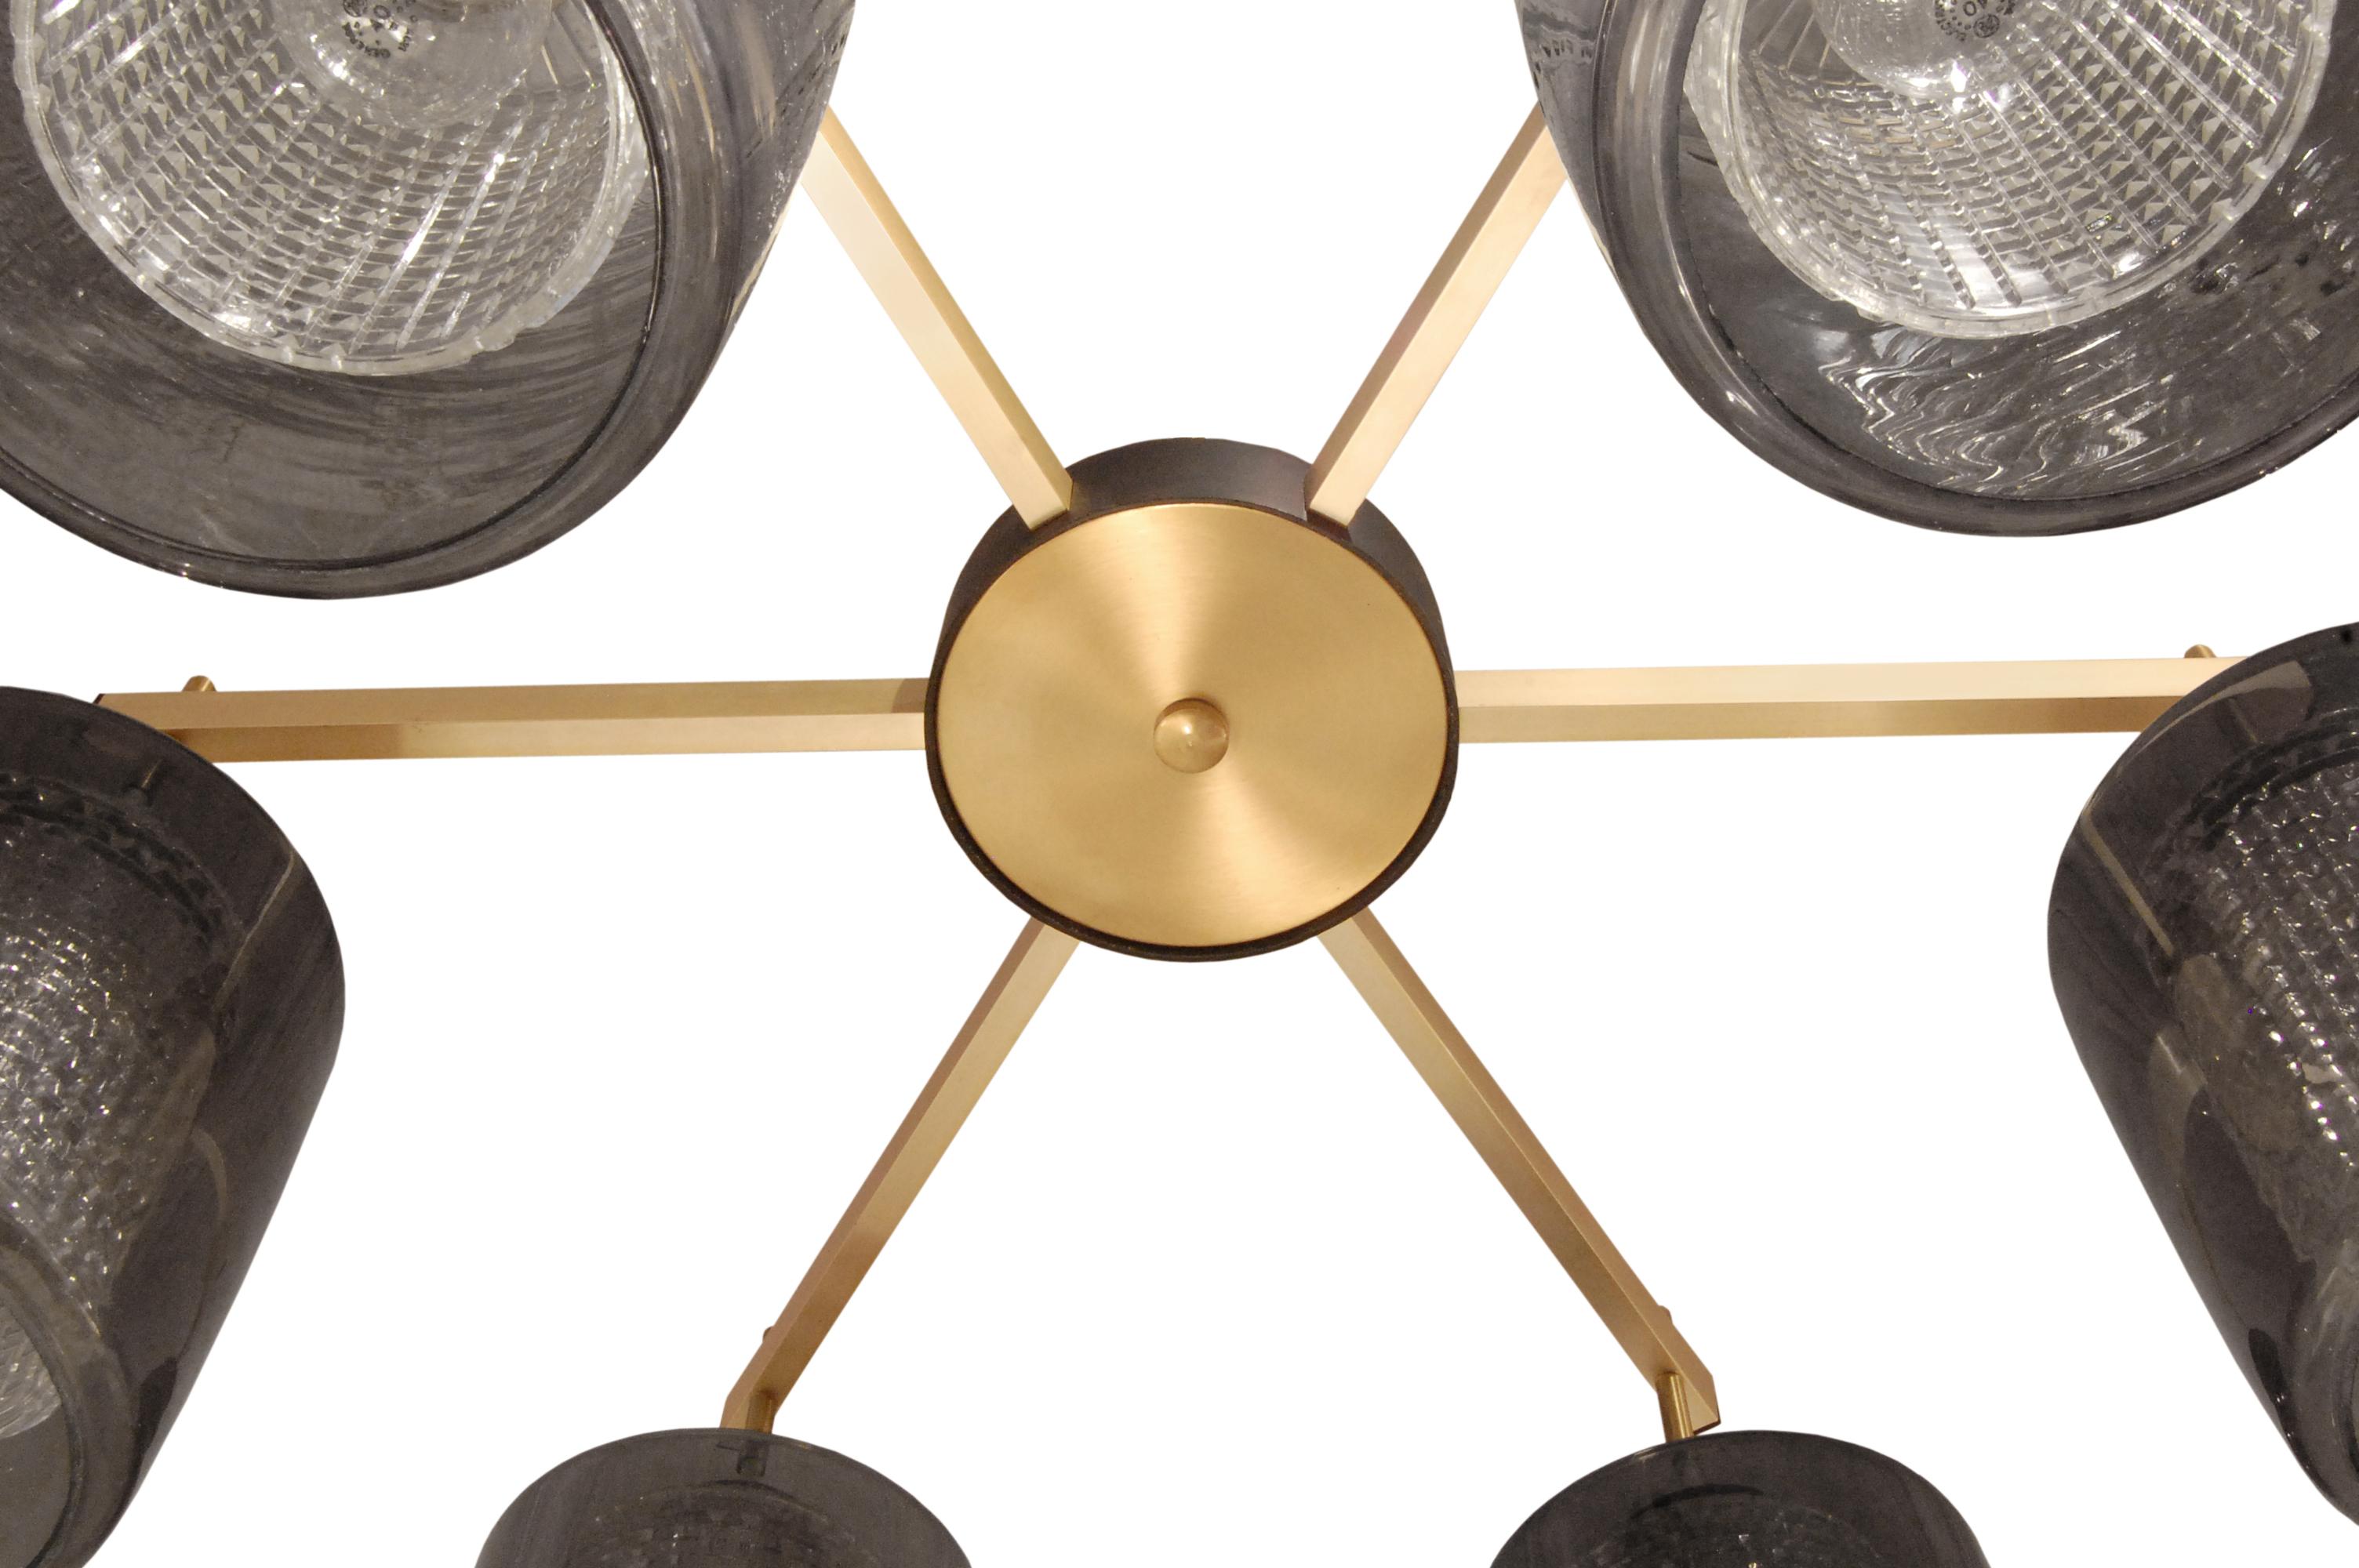 Chic chandelier with 6 arms in brushed brass with textured glass diffusers under smoked glass shades by Lightolier, American, 1950s (Lightolier label present). The combination of brushed brass and smoked glass is luxurious.